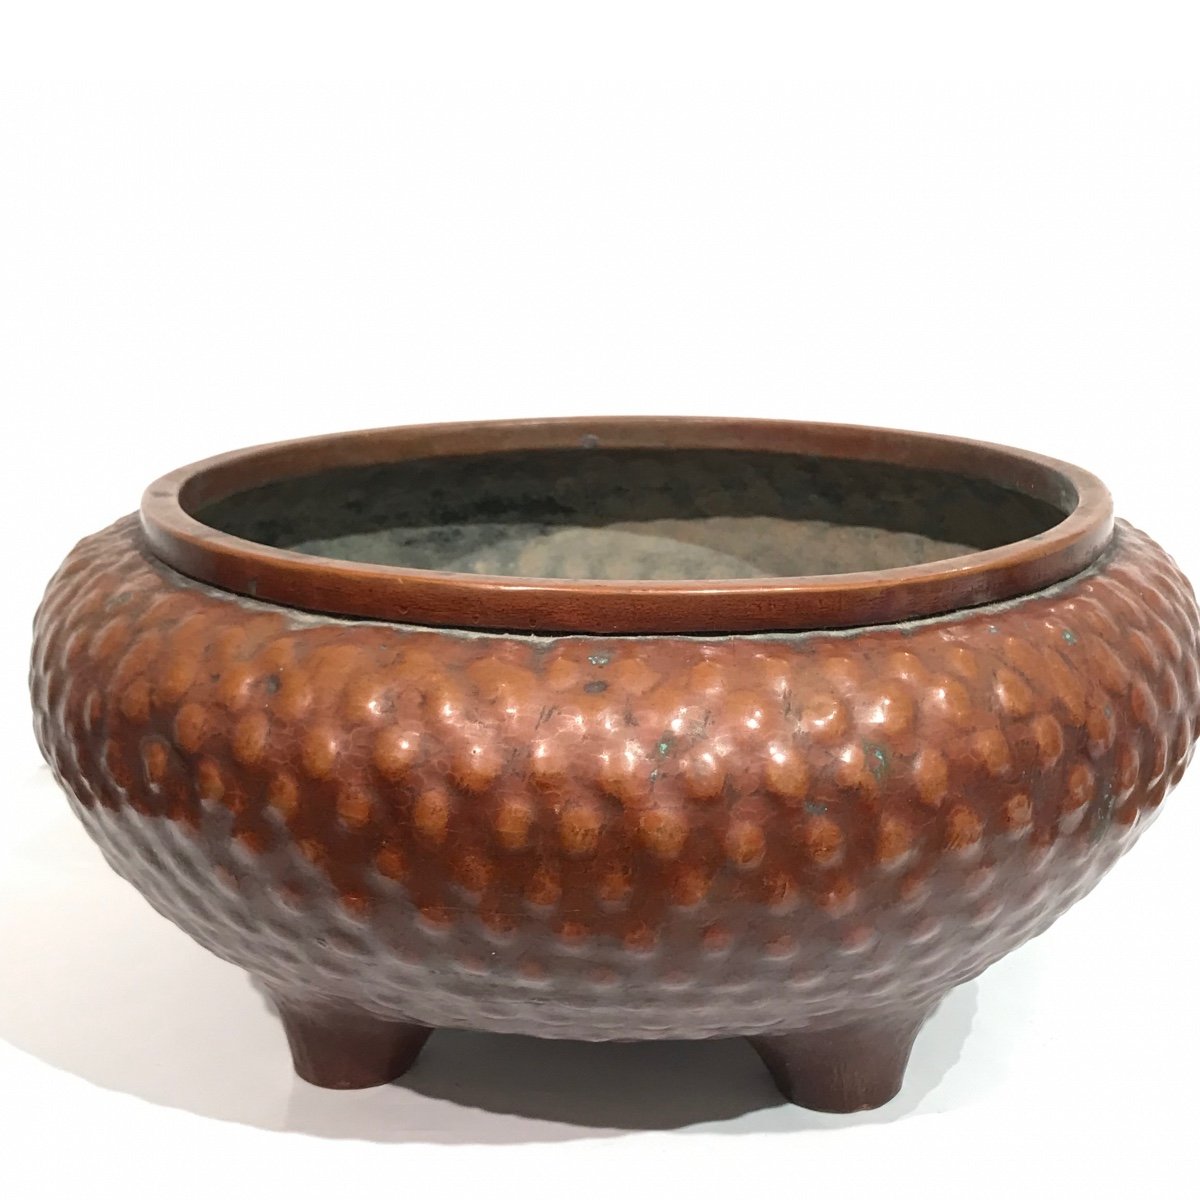 Hibachi Japanese Brazier In Hammered Copper - Japan-photo-6